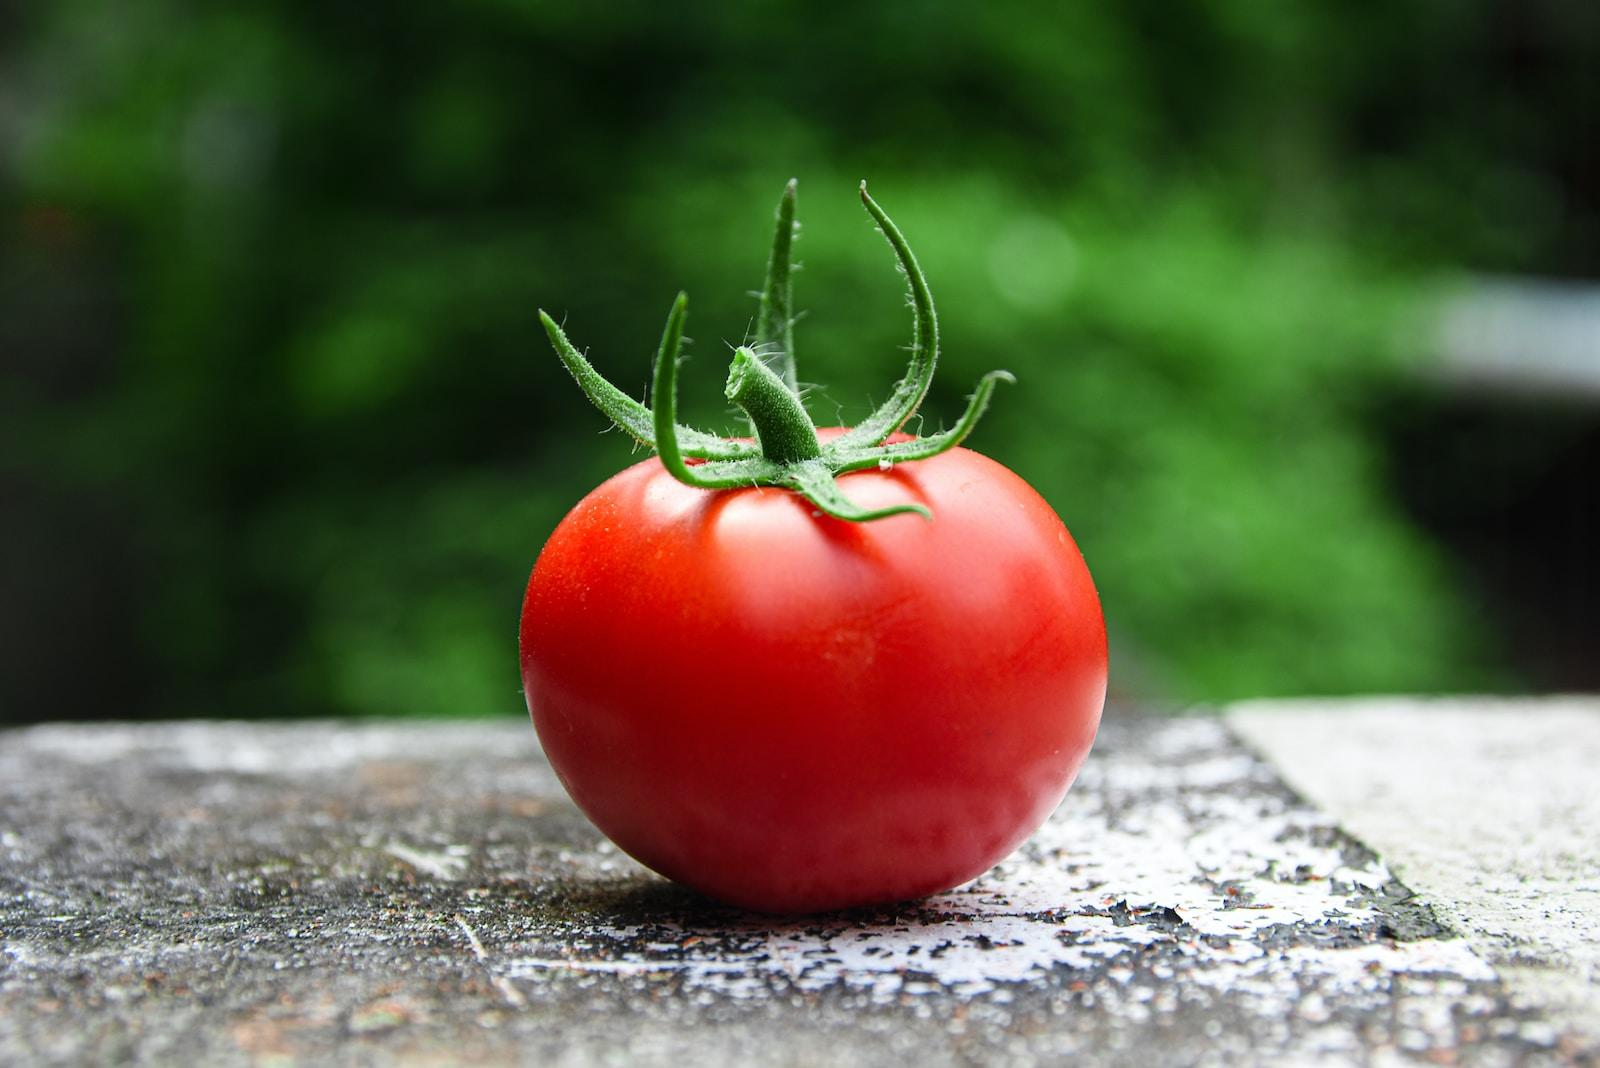 “The Tomato Effect”: Why Nutritional Therapies are Rejected by Mainstream Medicine